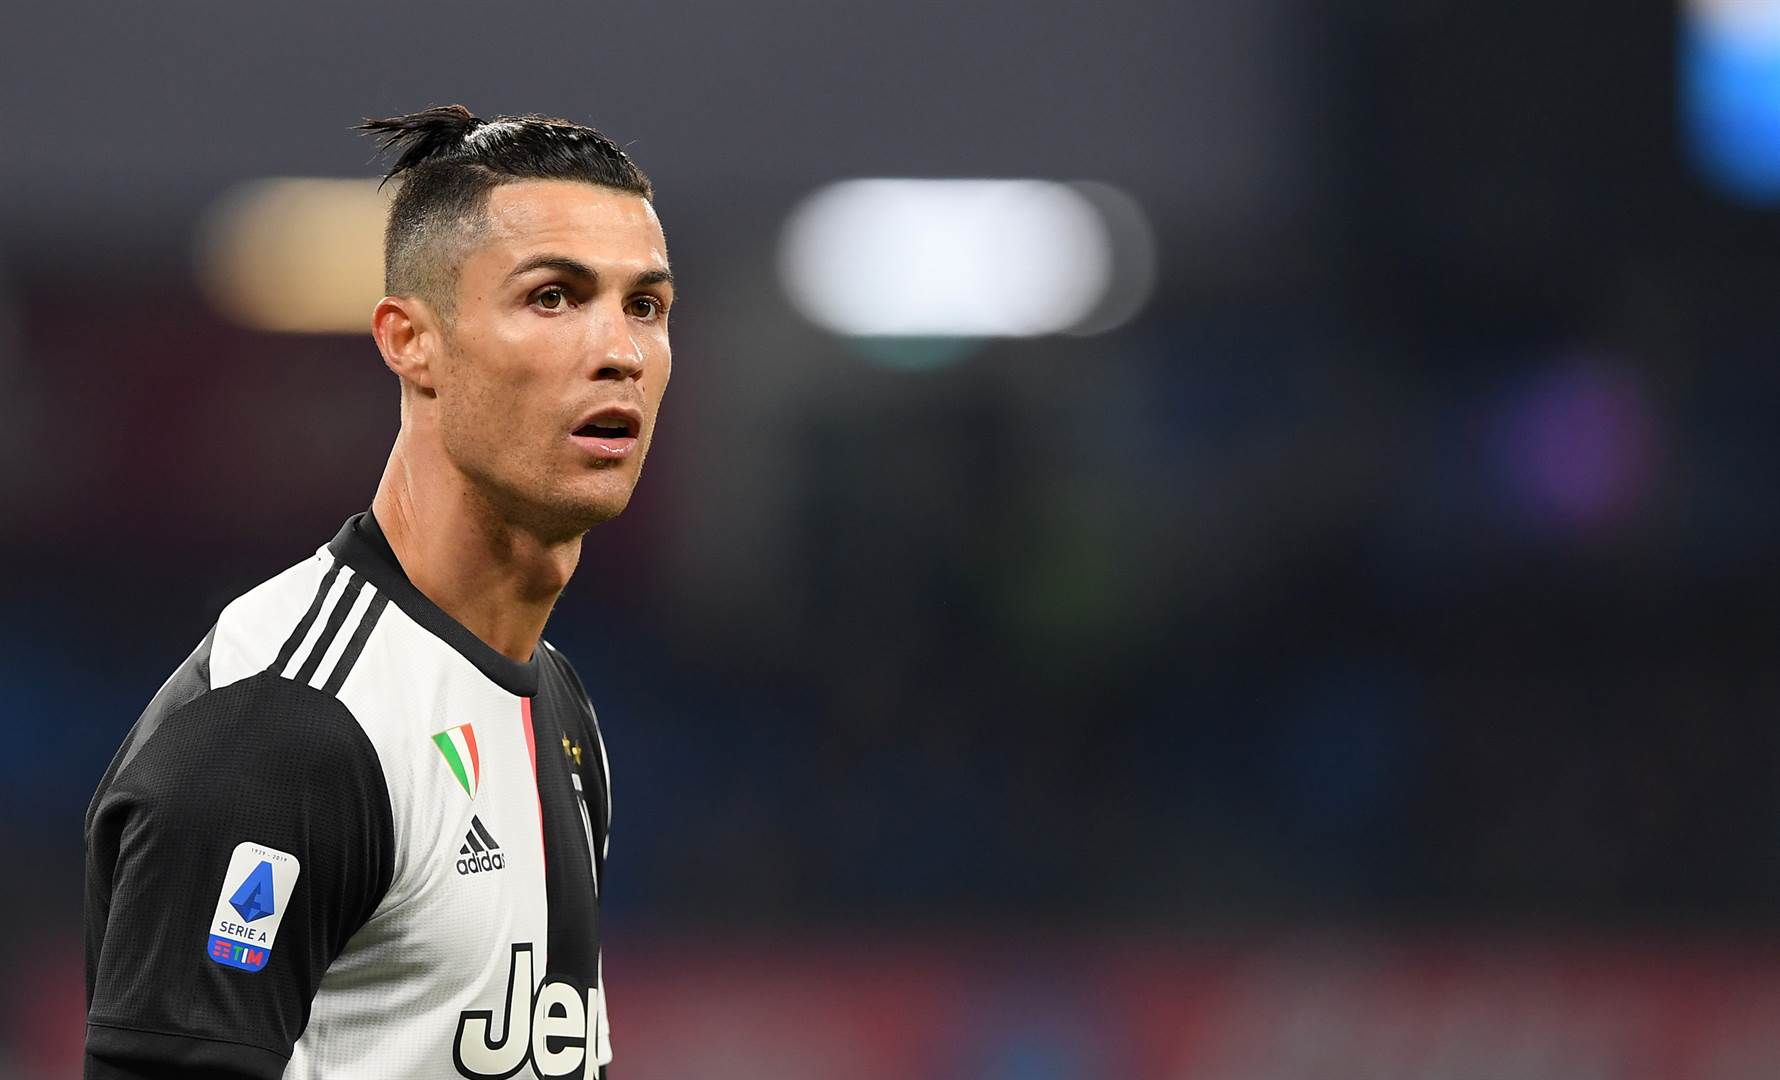 Three hairstyles, one goal for World Player of the Year Ronaldo | Latest  News India - Hindustan Times